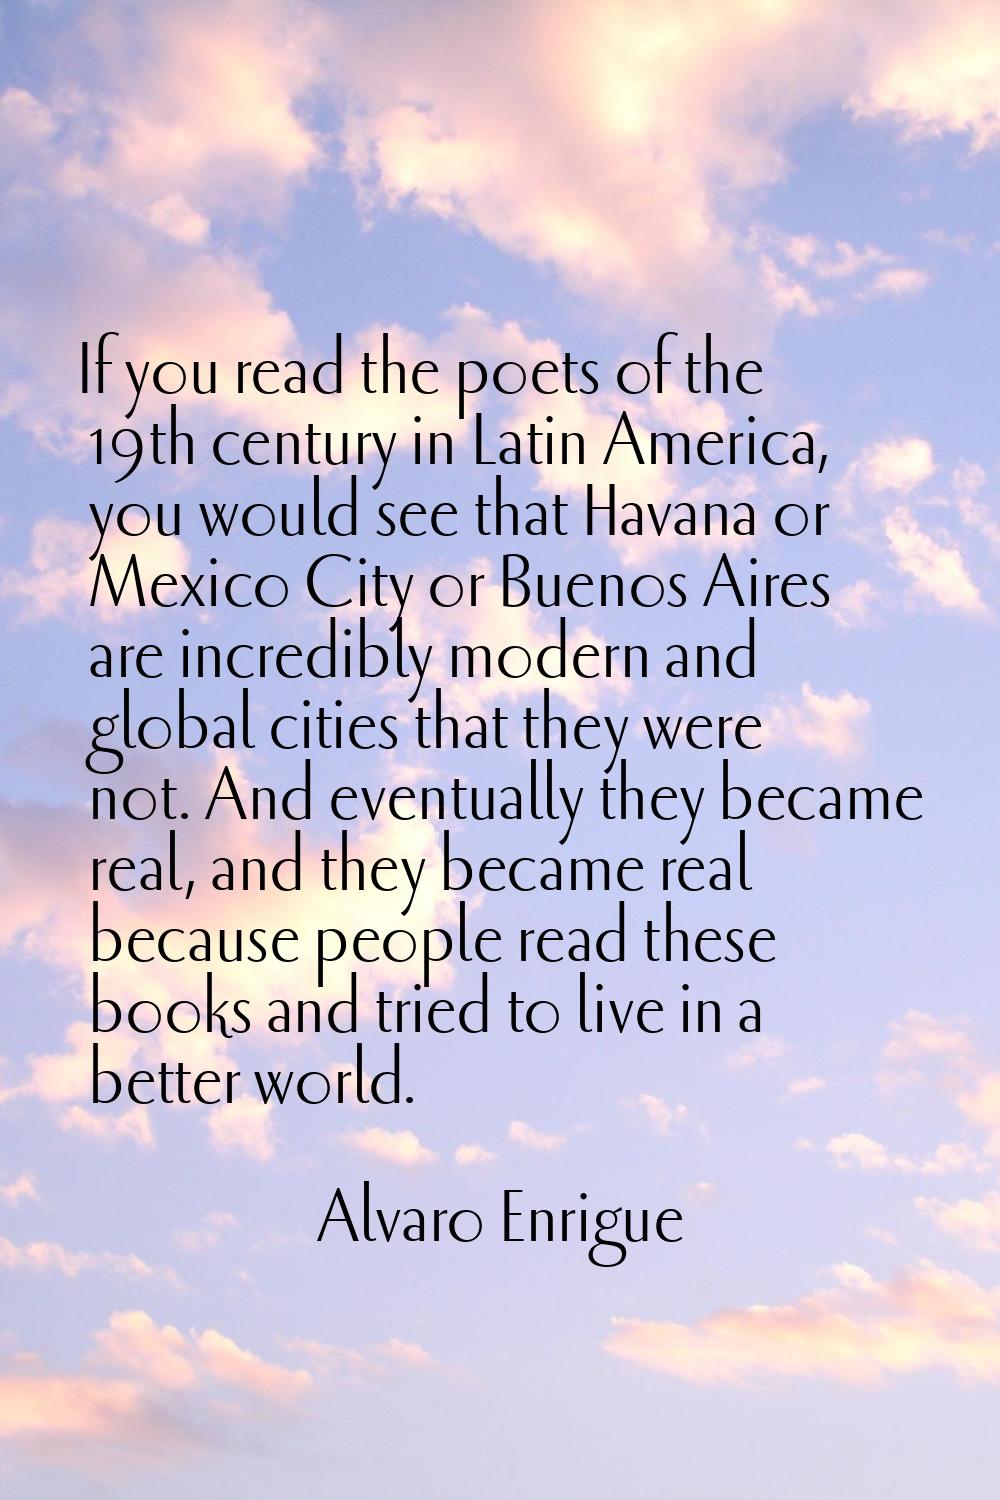 If you read the poets of the 19th century in Latin America, you would see that Havana or Mexico Cit